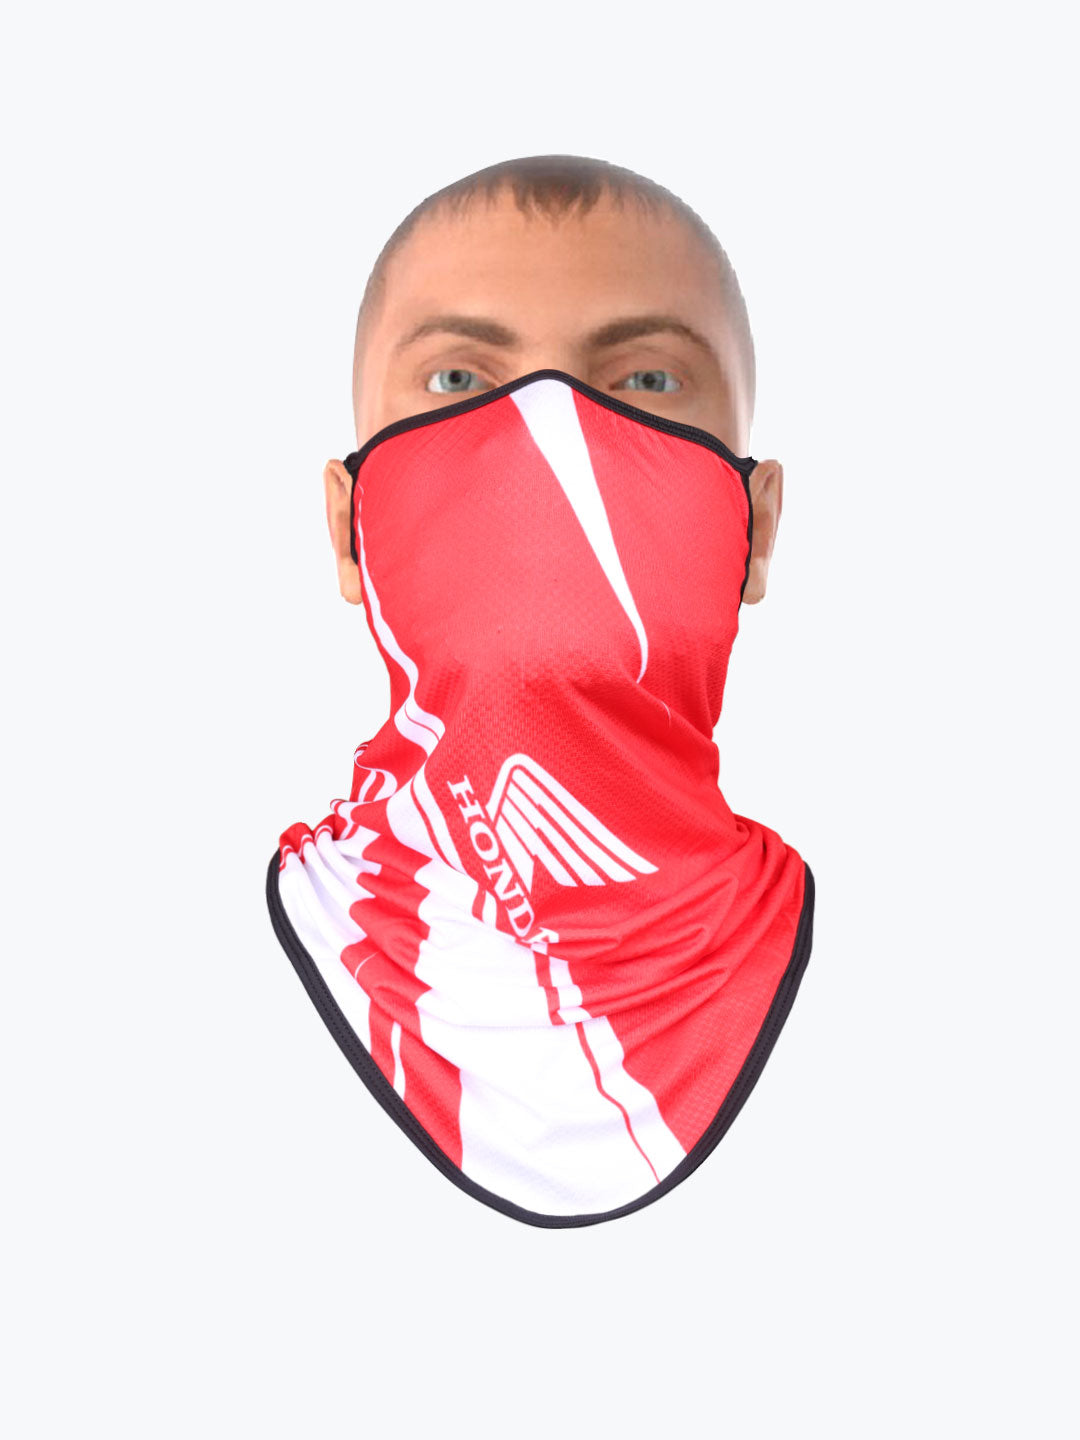 Riding face Mask Red White